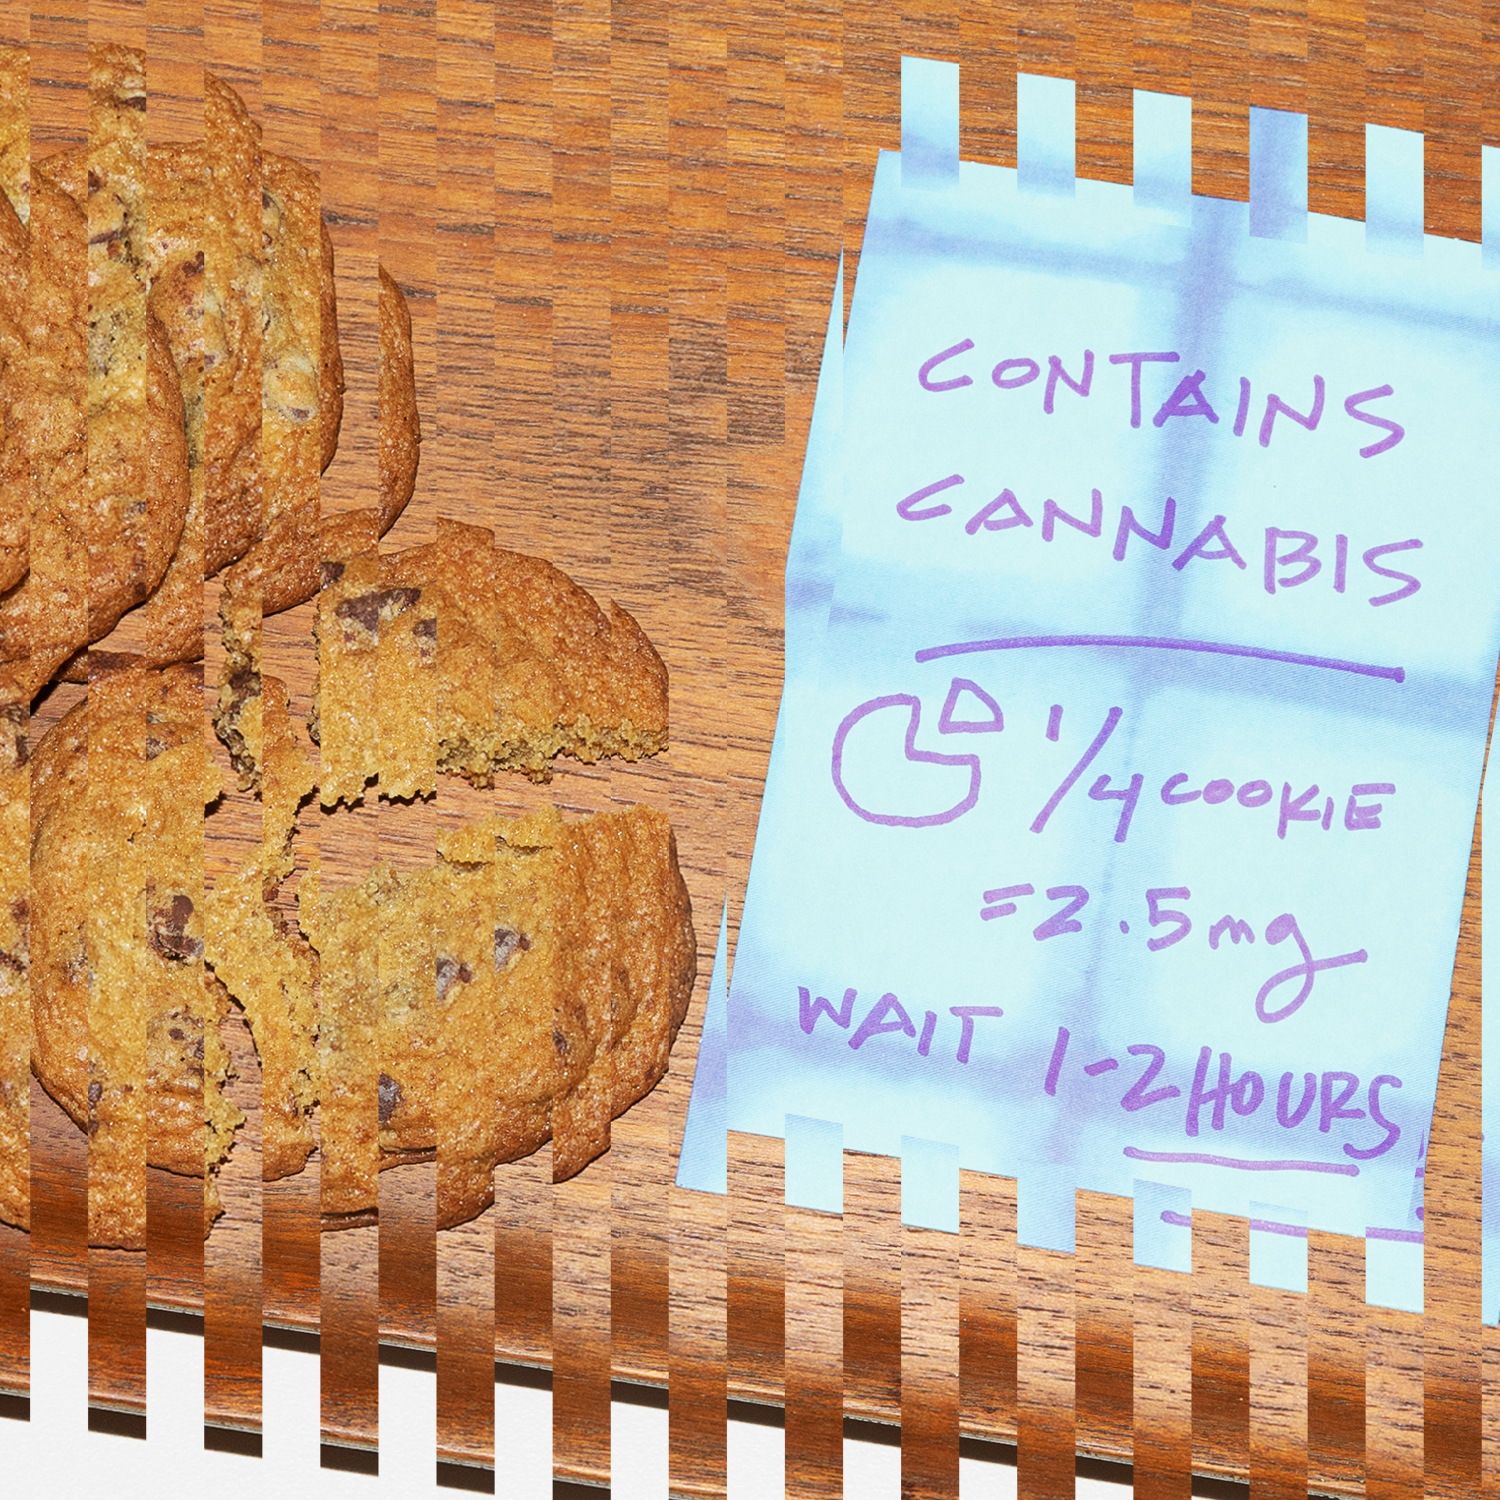 Cannabis cookies with dose and duration